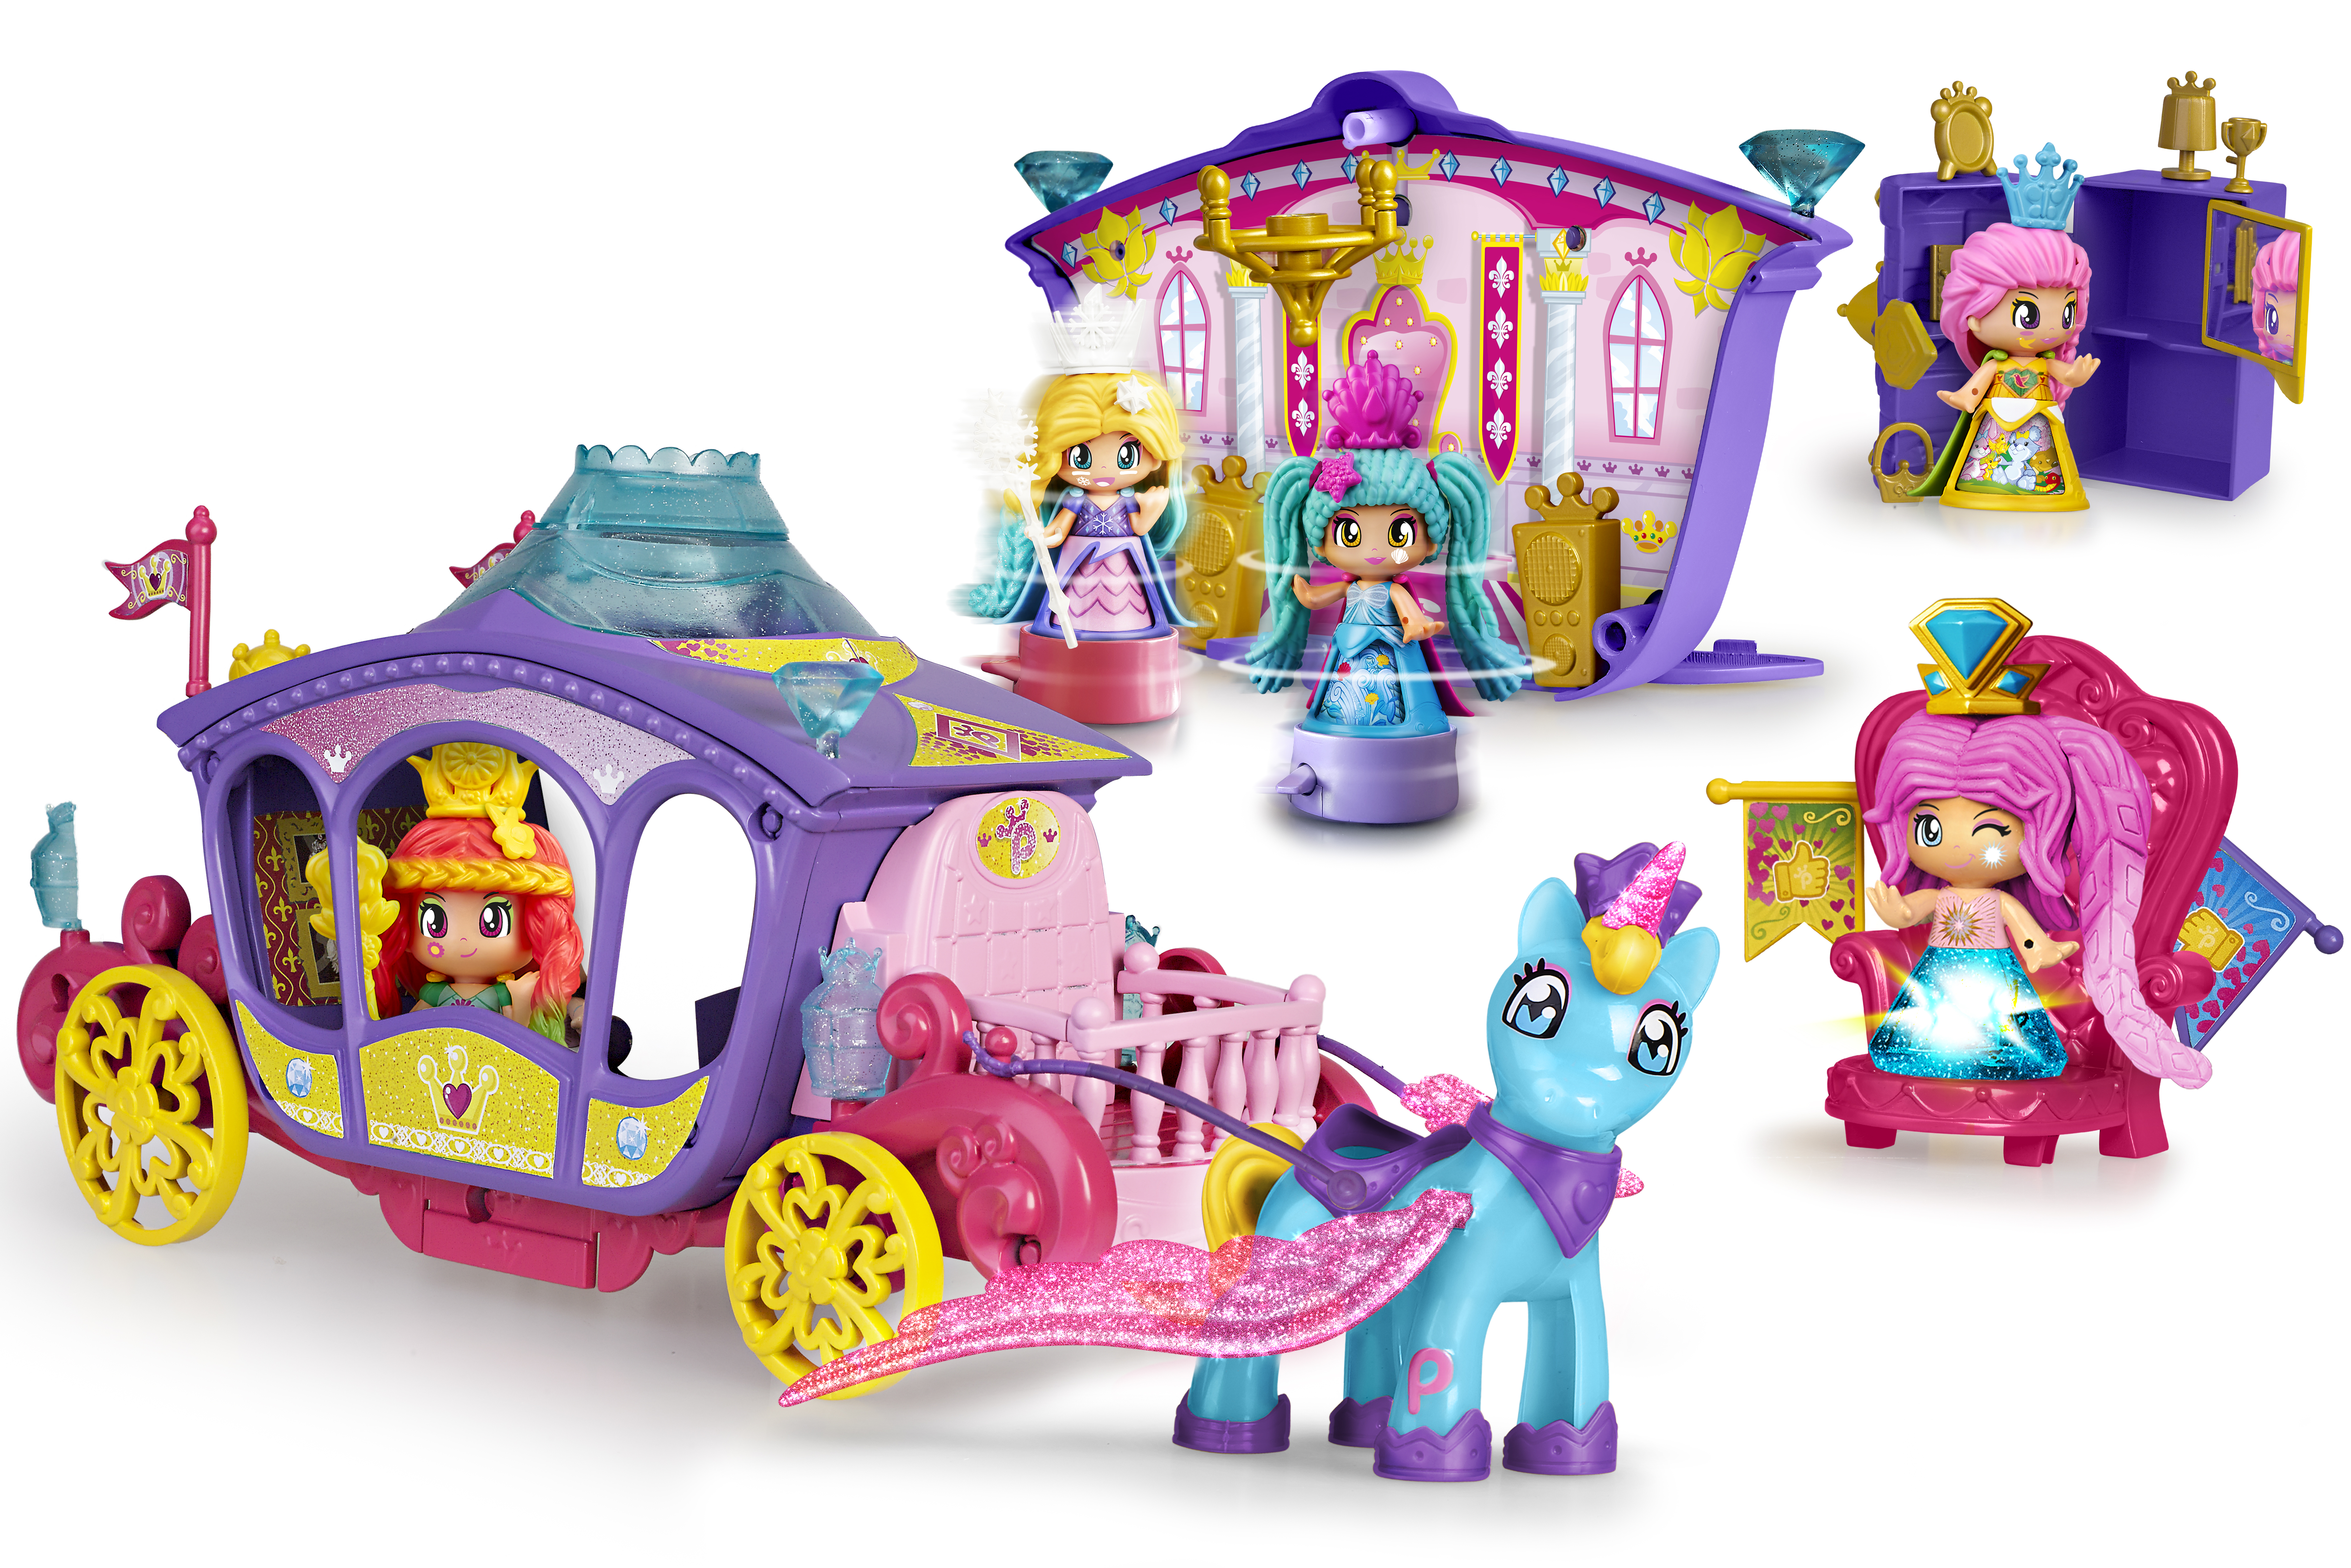 PINYPON QUEENS CARRIAGE 15805 - N38620